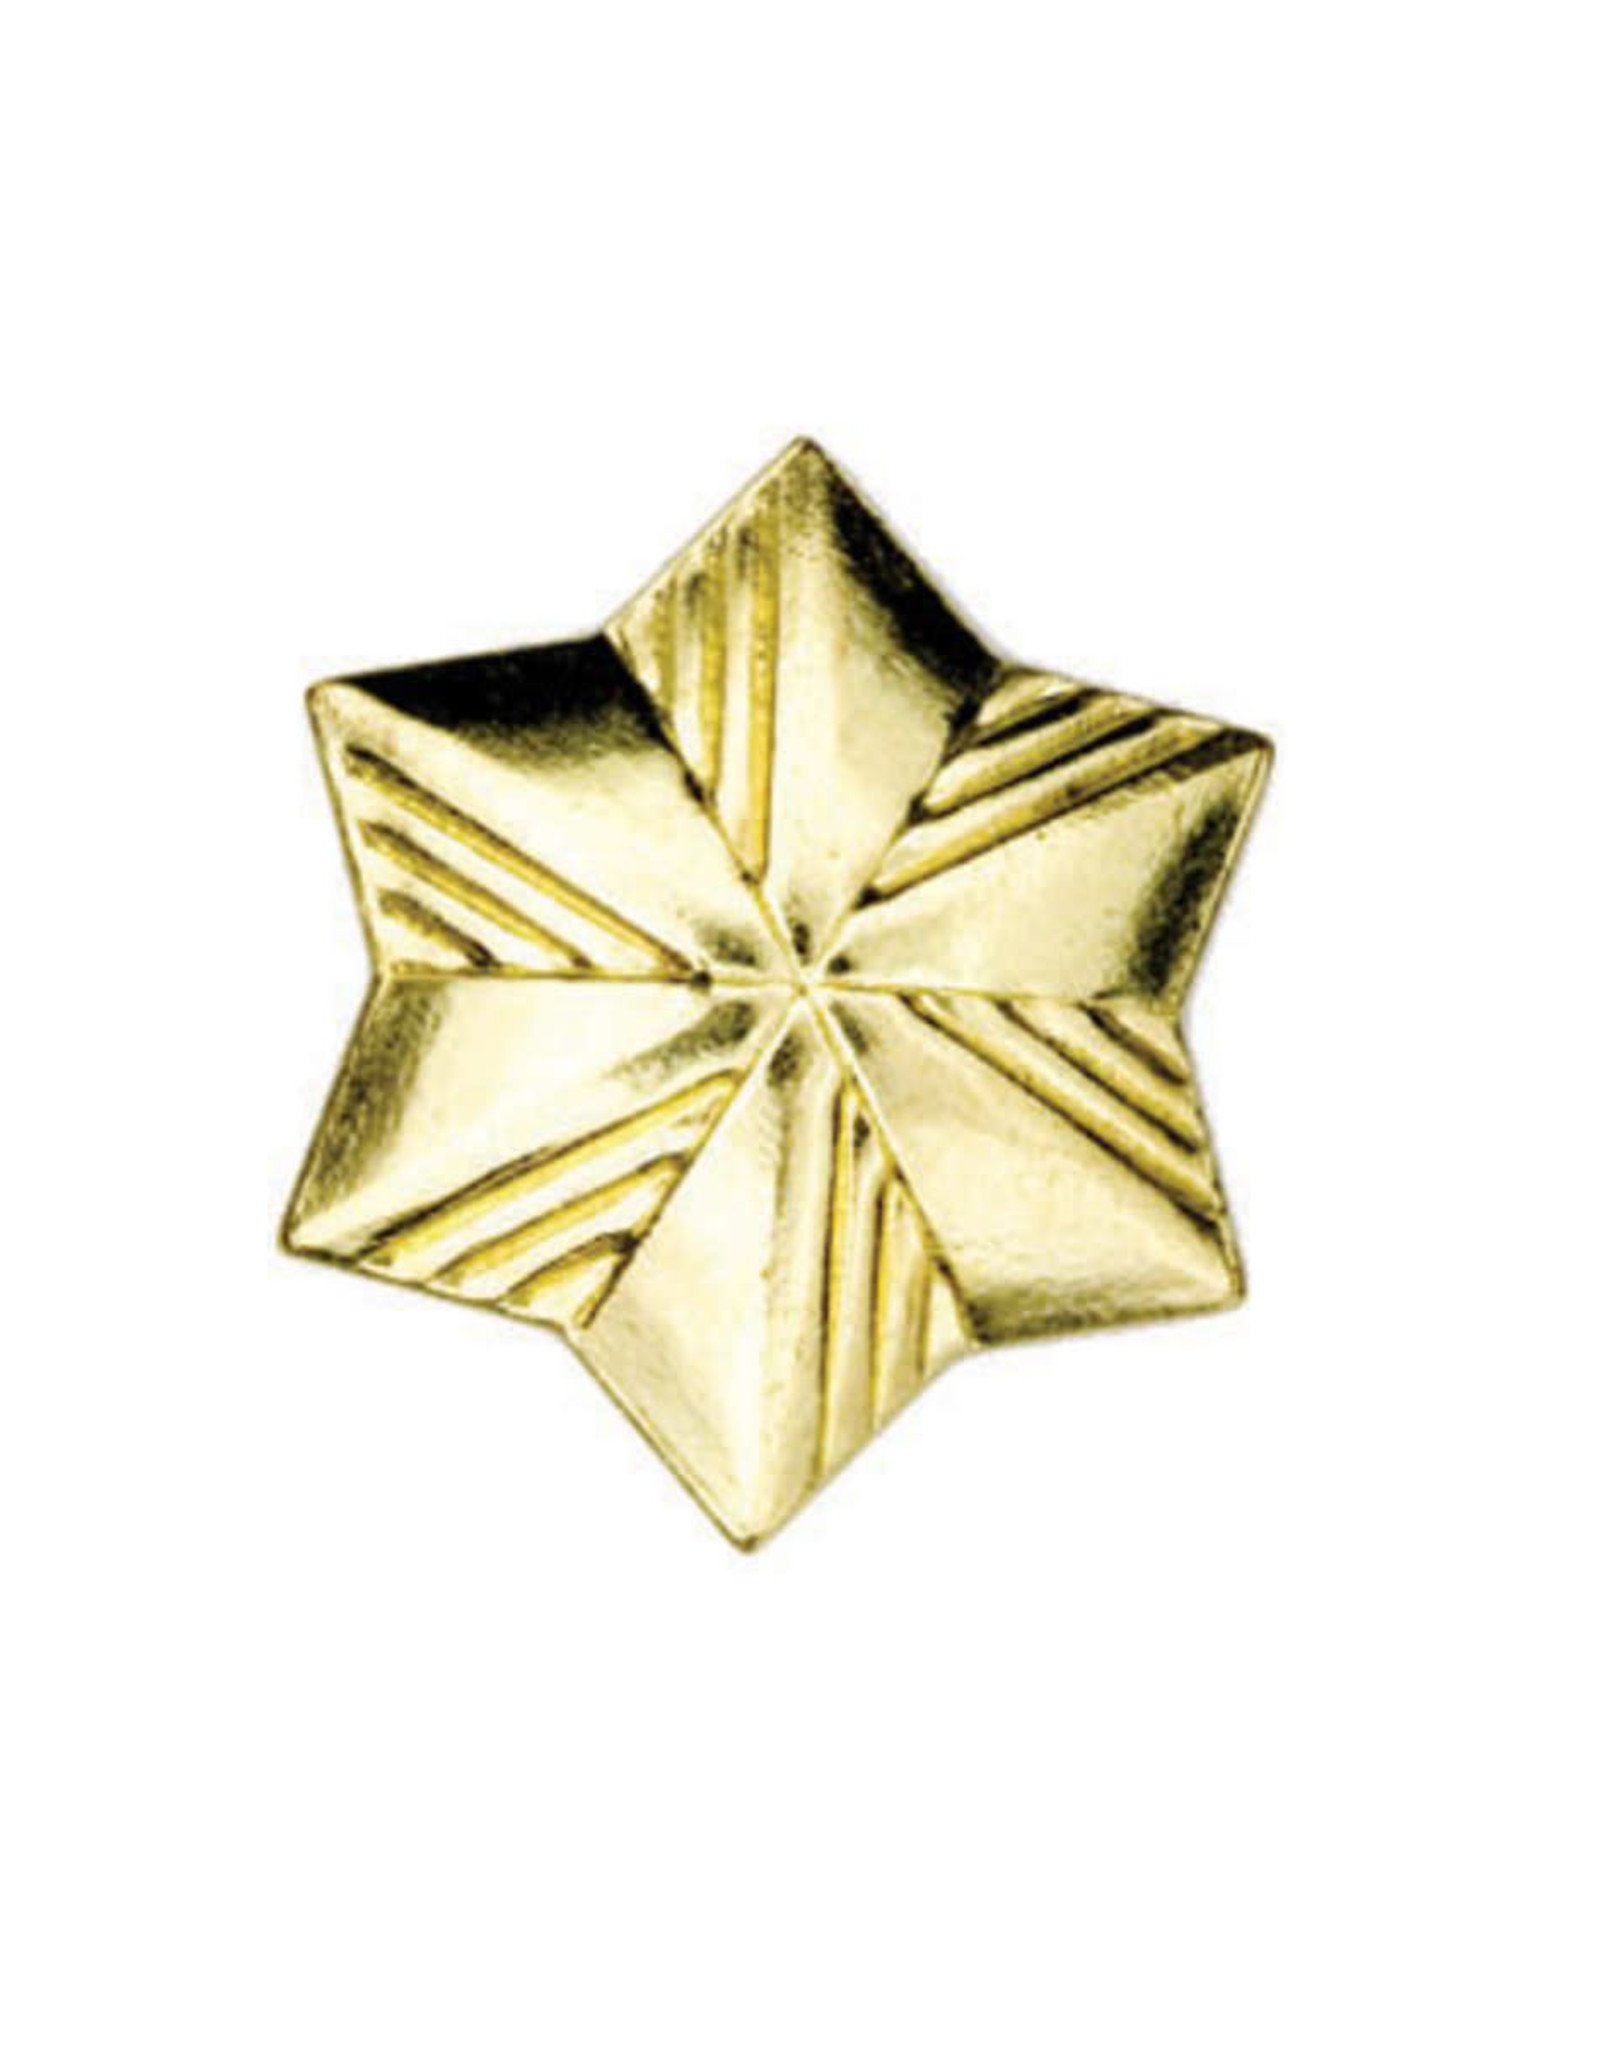 GIRL SCOUTS OF THE USA Membership Star Pin